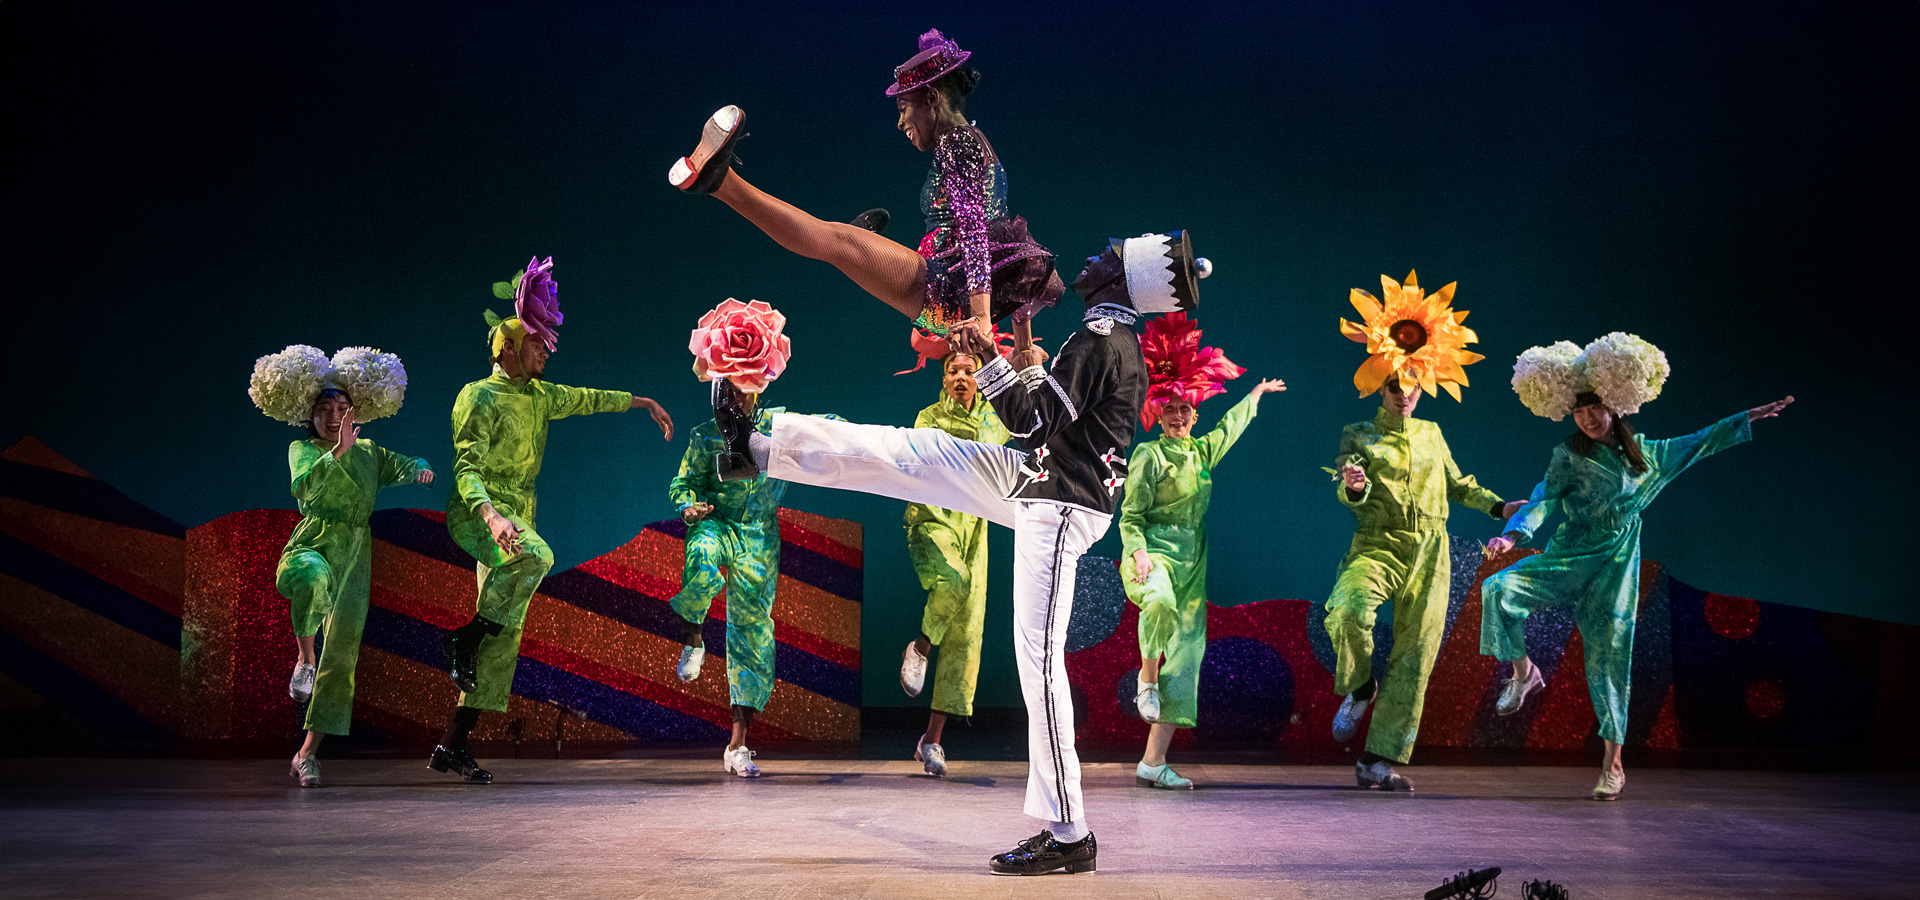 Dancers in colorful flower costumes perform on stage in the Dorrance Dance group's interpretation of Tchaikovsky's Nutcracker Suite.